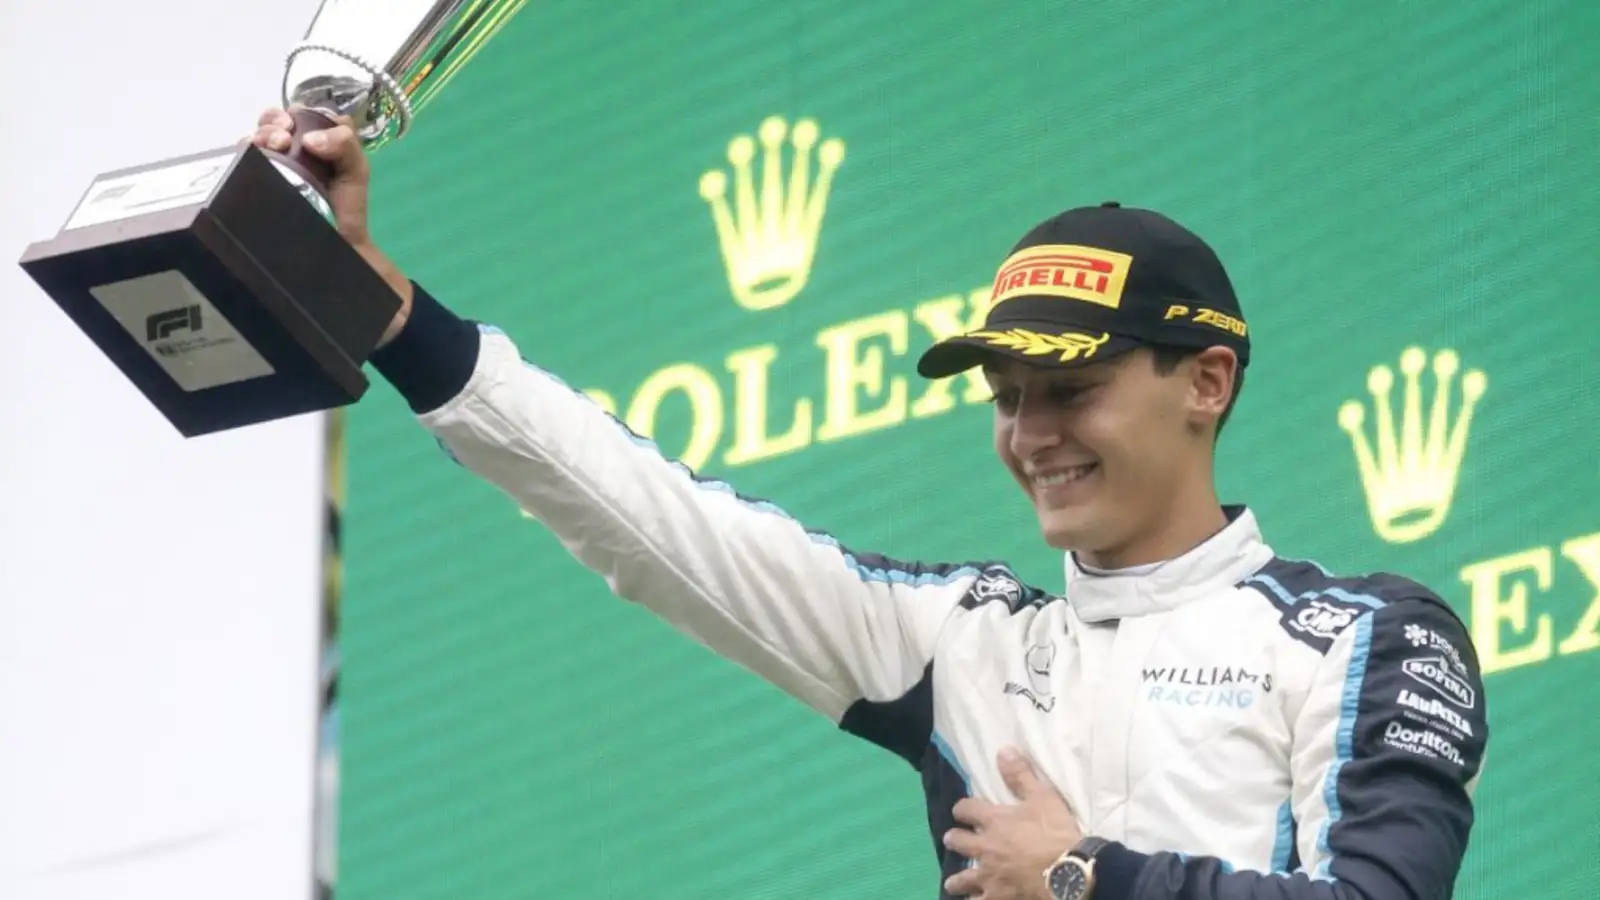 George Russell celebrates his first ever F1 podium, holding his trophy aloft. Belgium August 2021